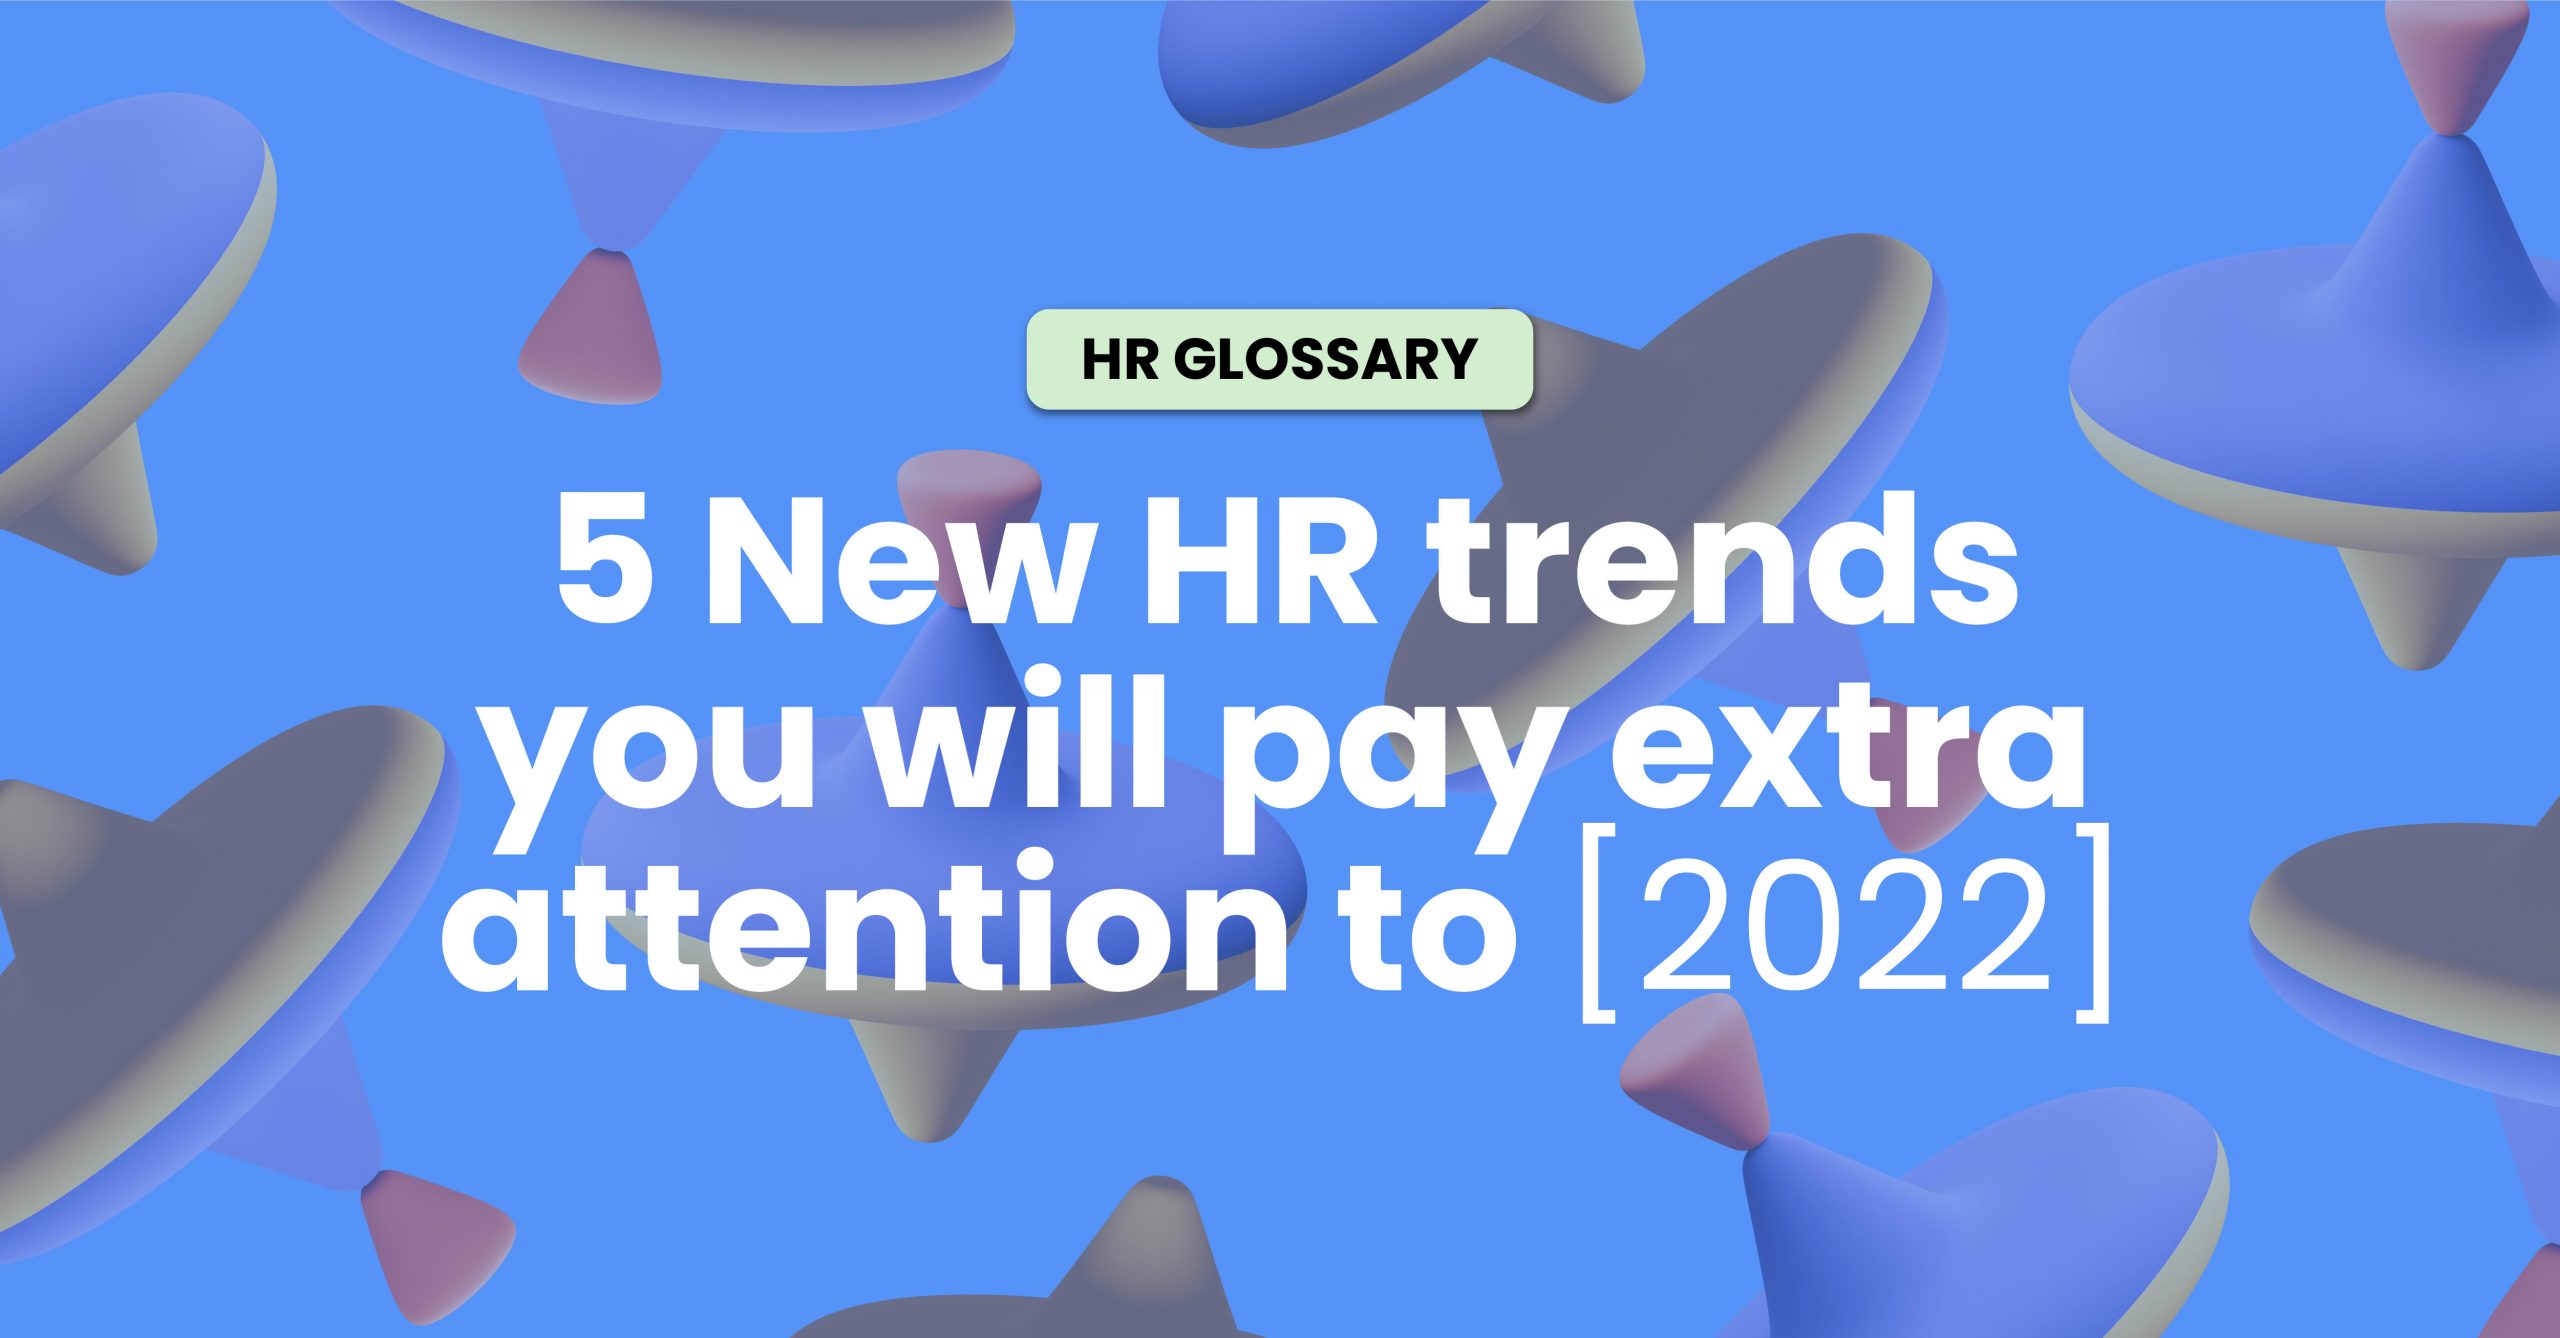 Top 5 HR Trends for 2022